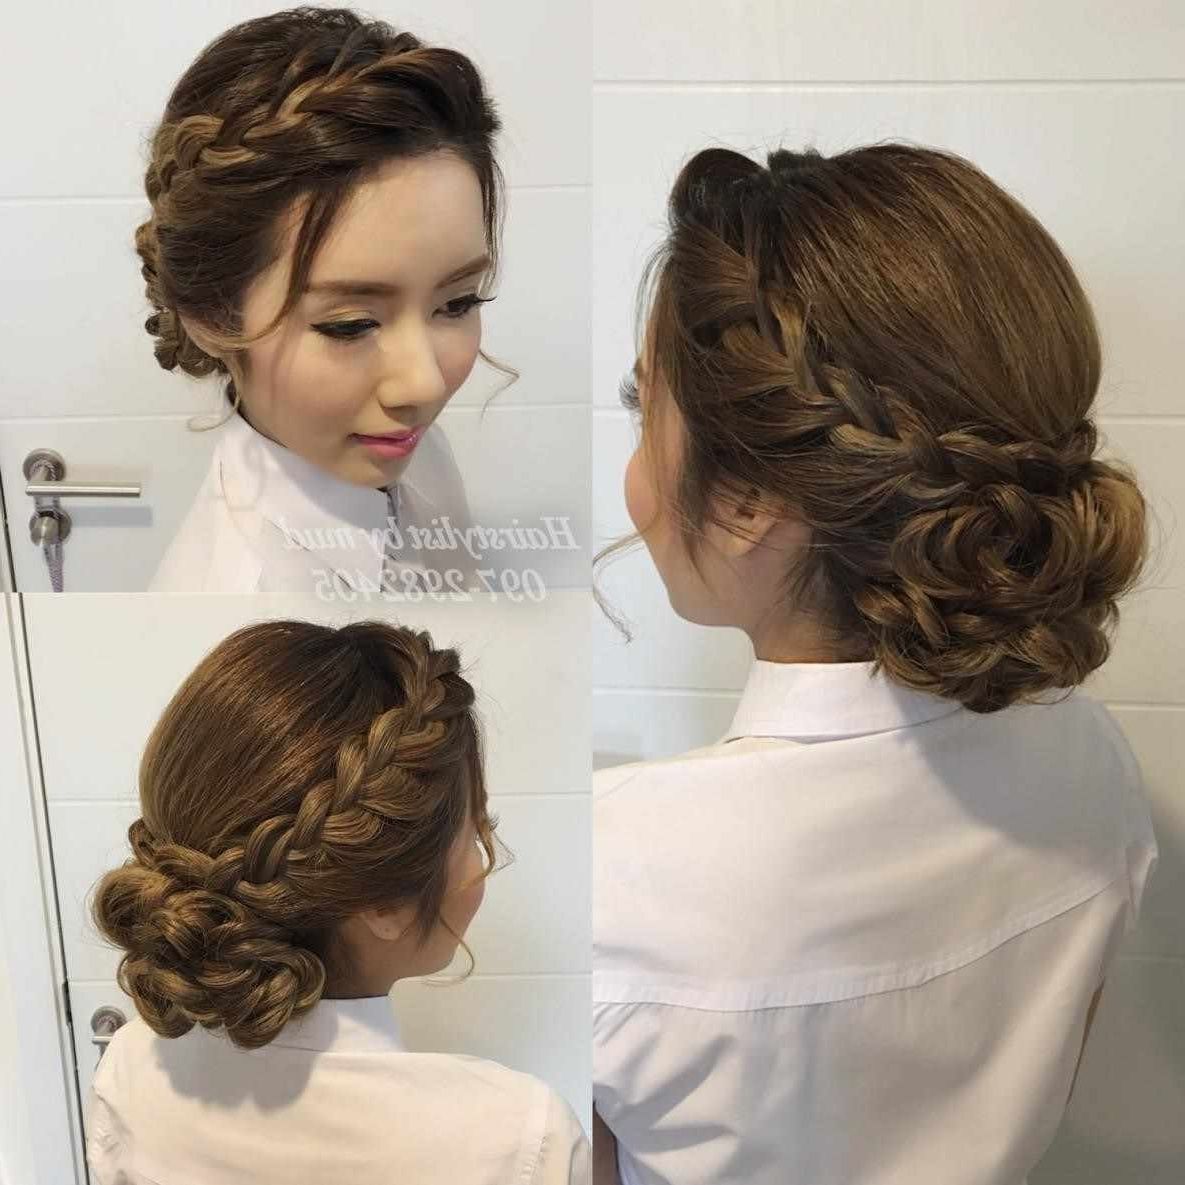 Recent Wedding Hairstyles With Medium Length Hair In Ideas Stunningdding Hairstyles For Medium Length Hair Half Up Easy (View 4 of 15)